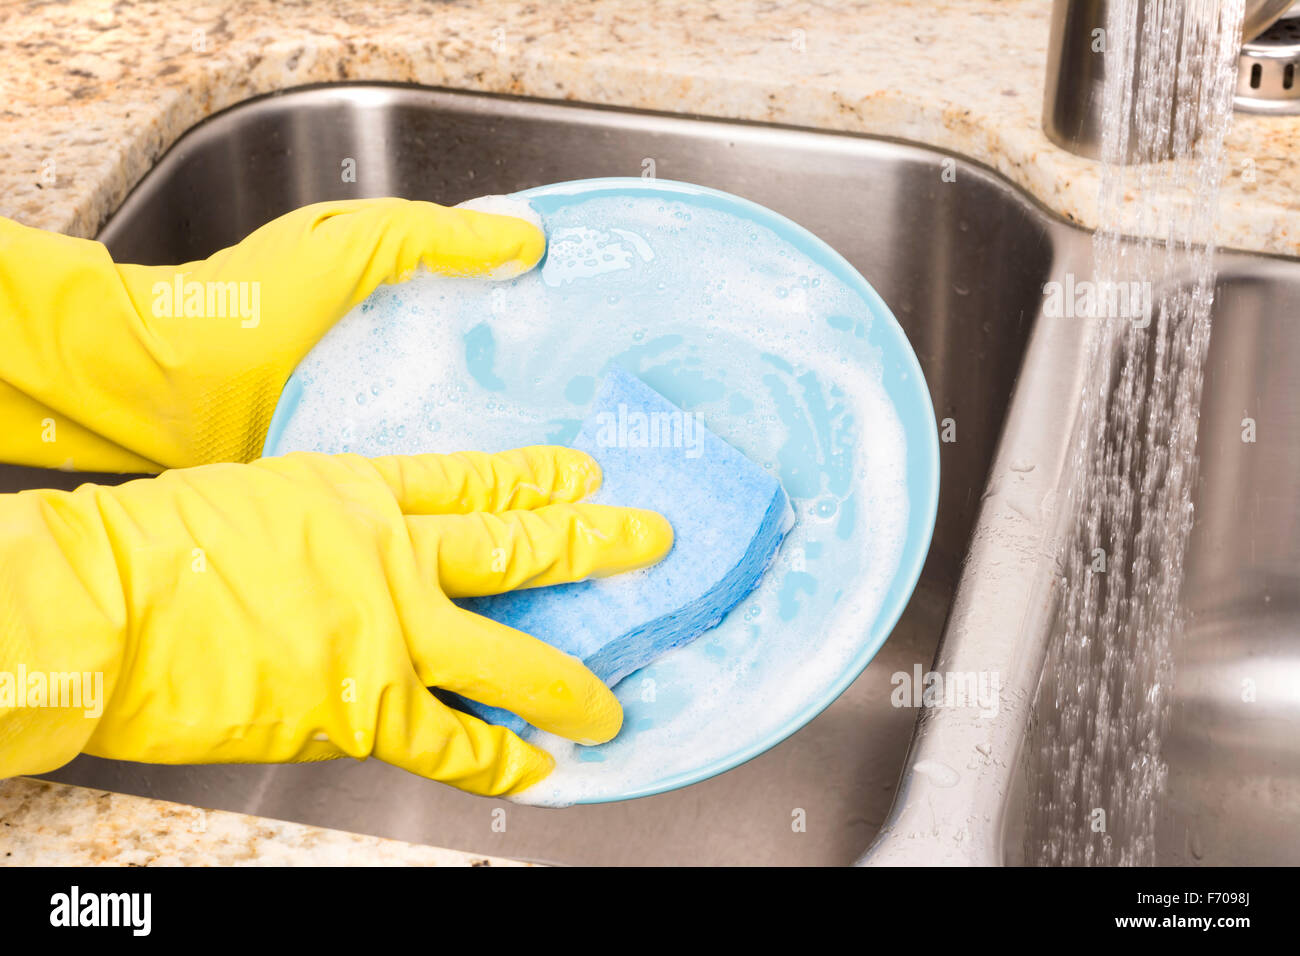 A person washes dinner plates using soapy detergent, a sponge and protective gloves then rinses them before drying Stock Photo